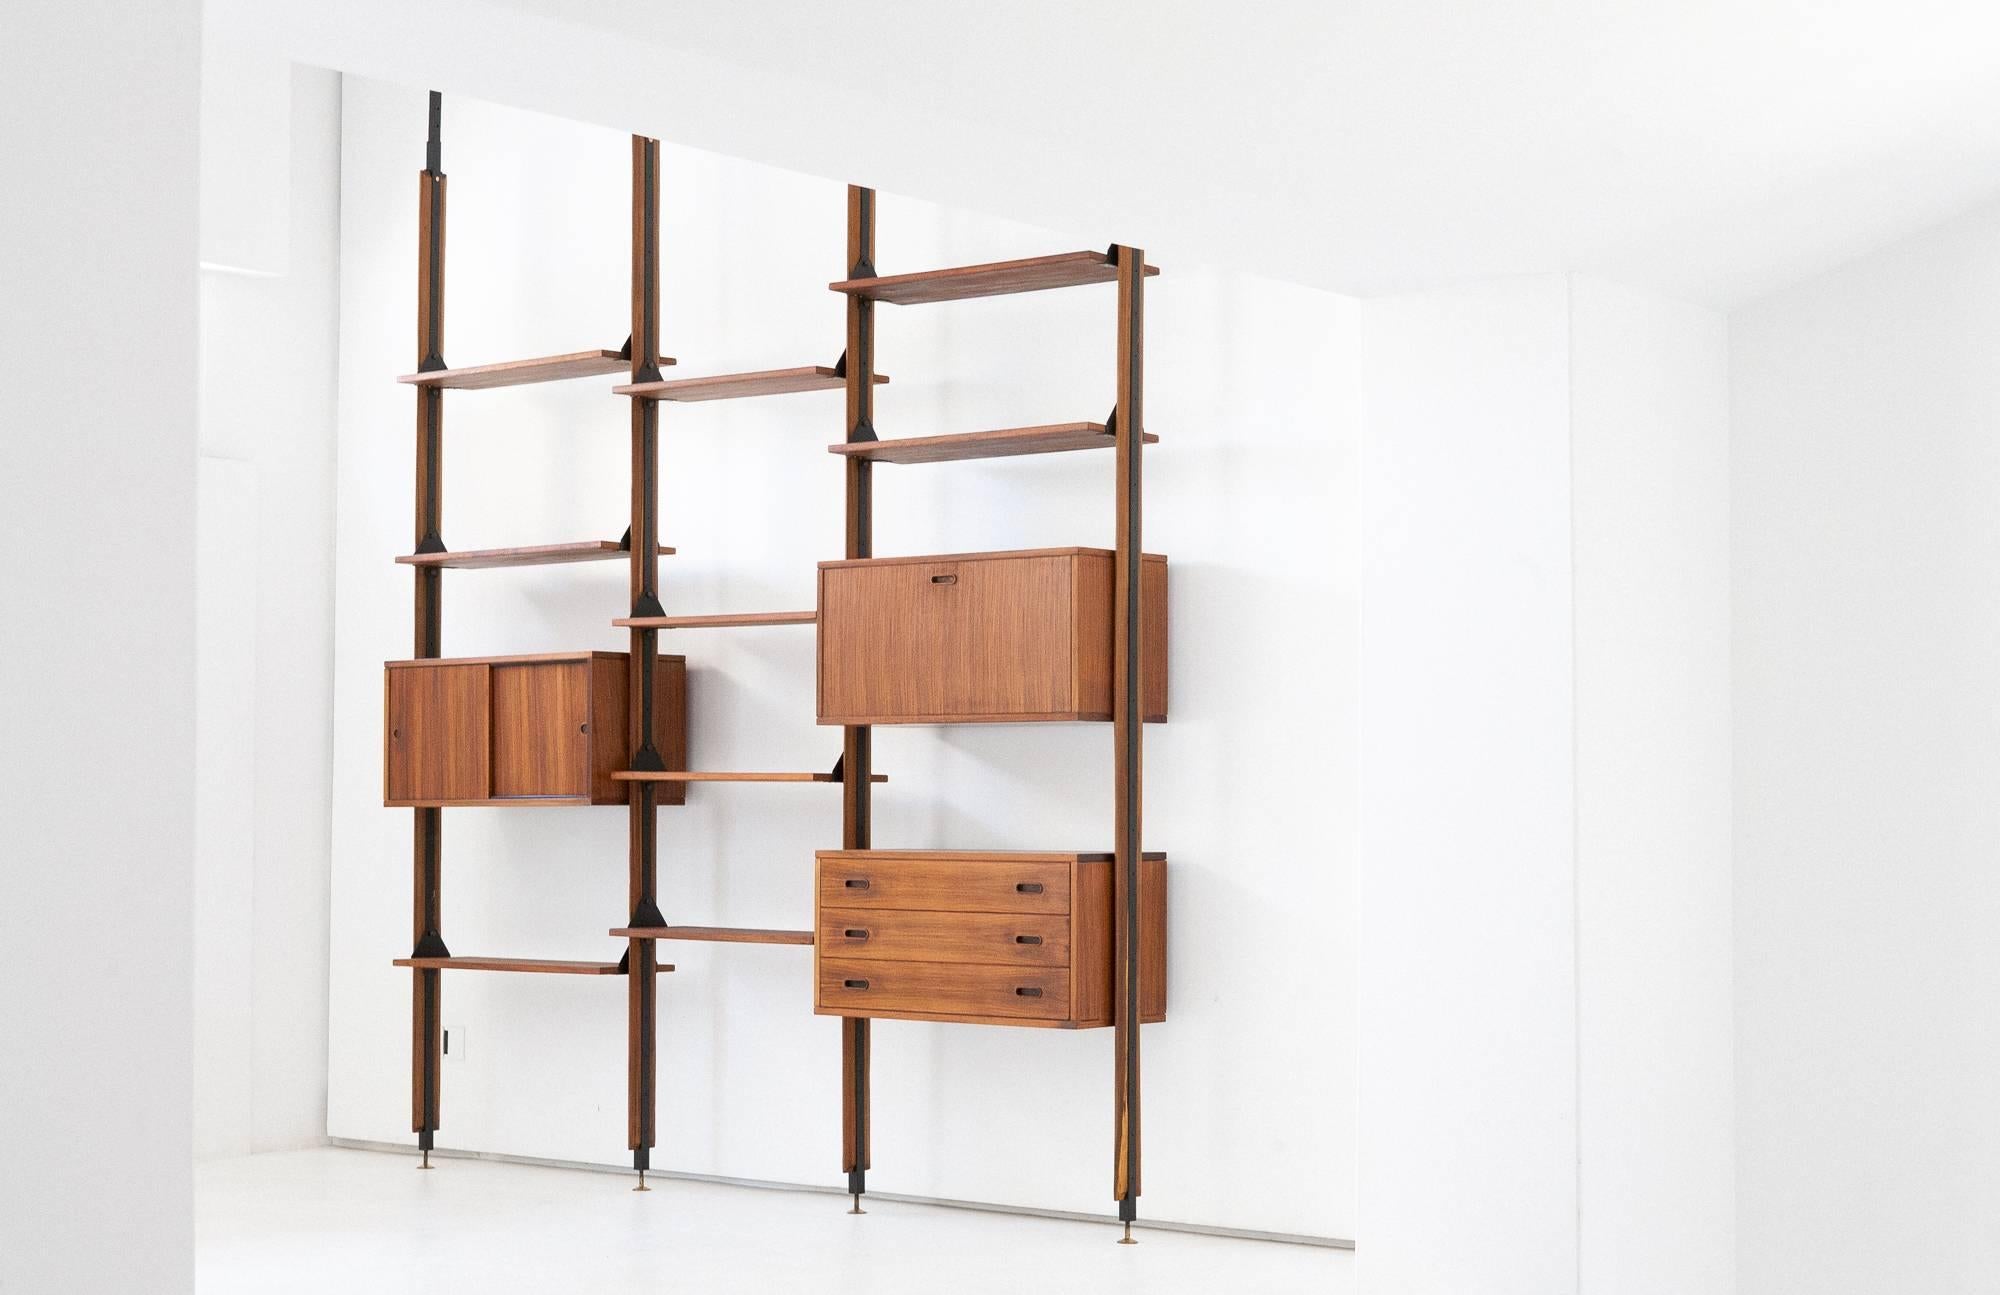 Italian modern wall unit from 1950s
Made of rosewood with lacquered iron and brass parts
Adjustable height 
Completely restored.